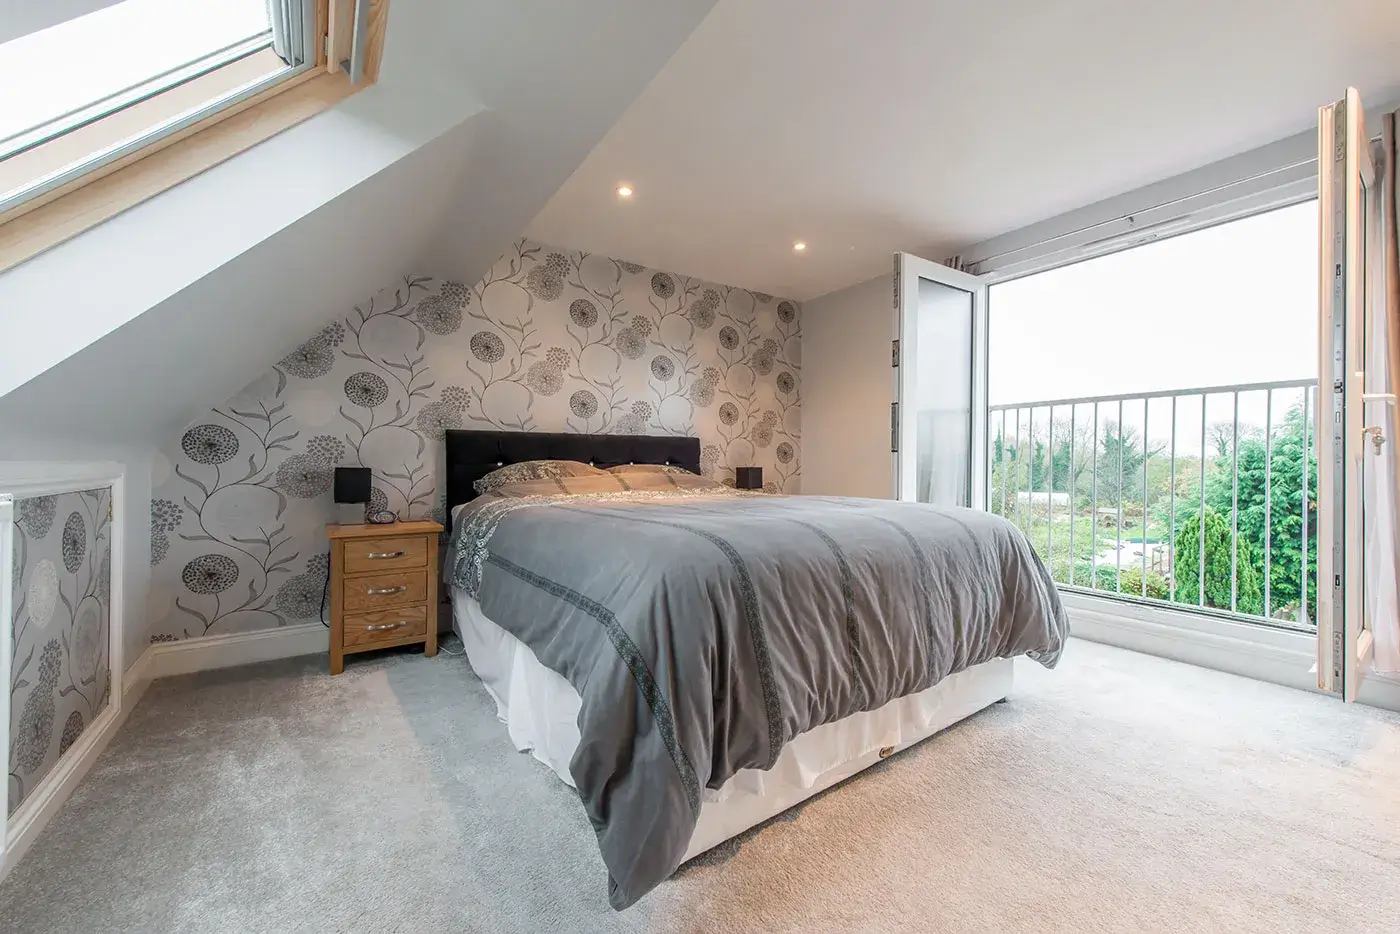 Master bedroom in dormer conversion, with open Velux windows